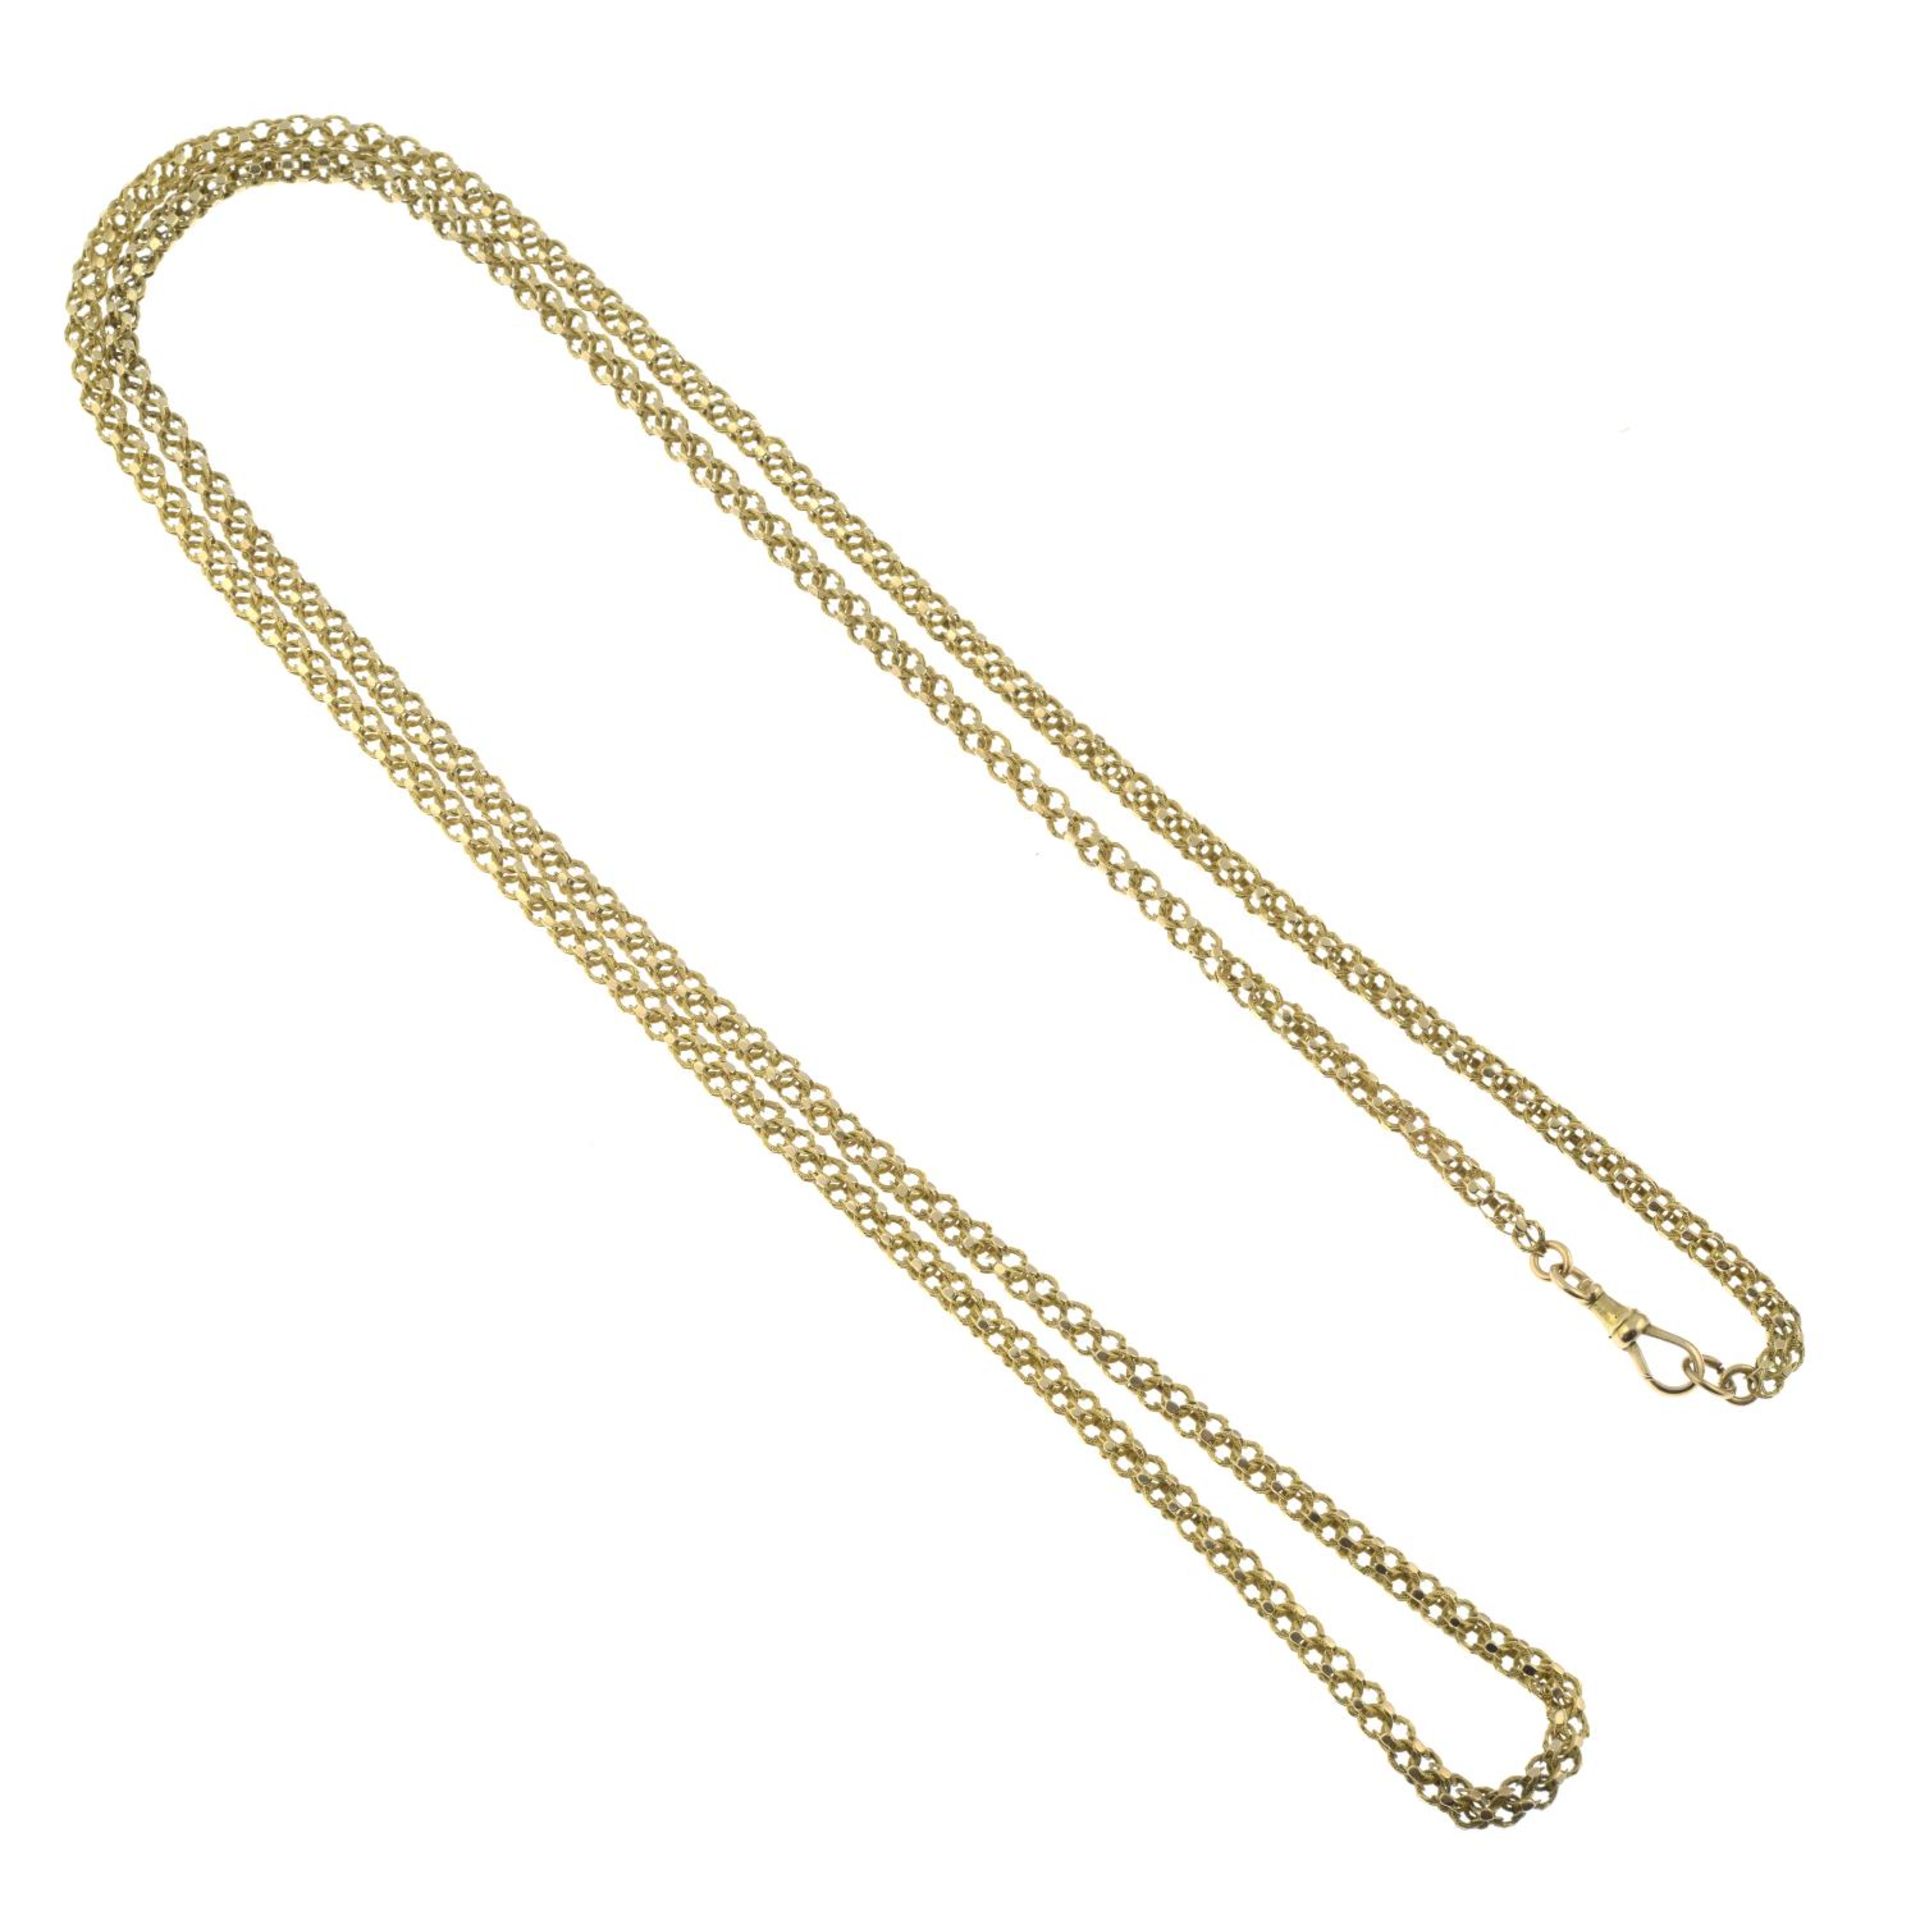 A longuard chain.Clasp stamped 15ct.Length 107cms. - Image 2 of 2